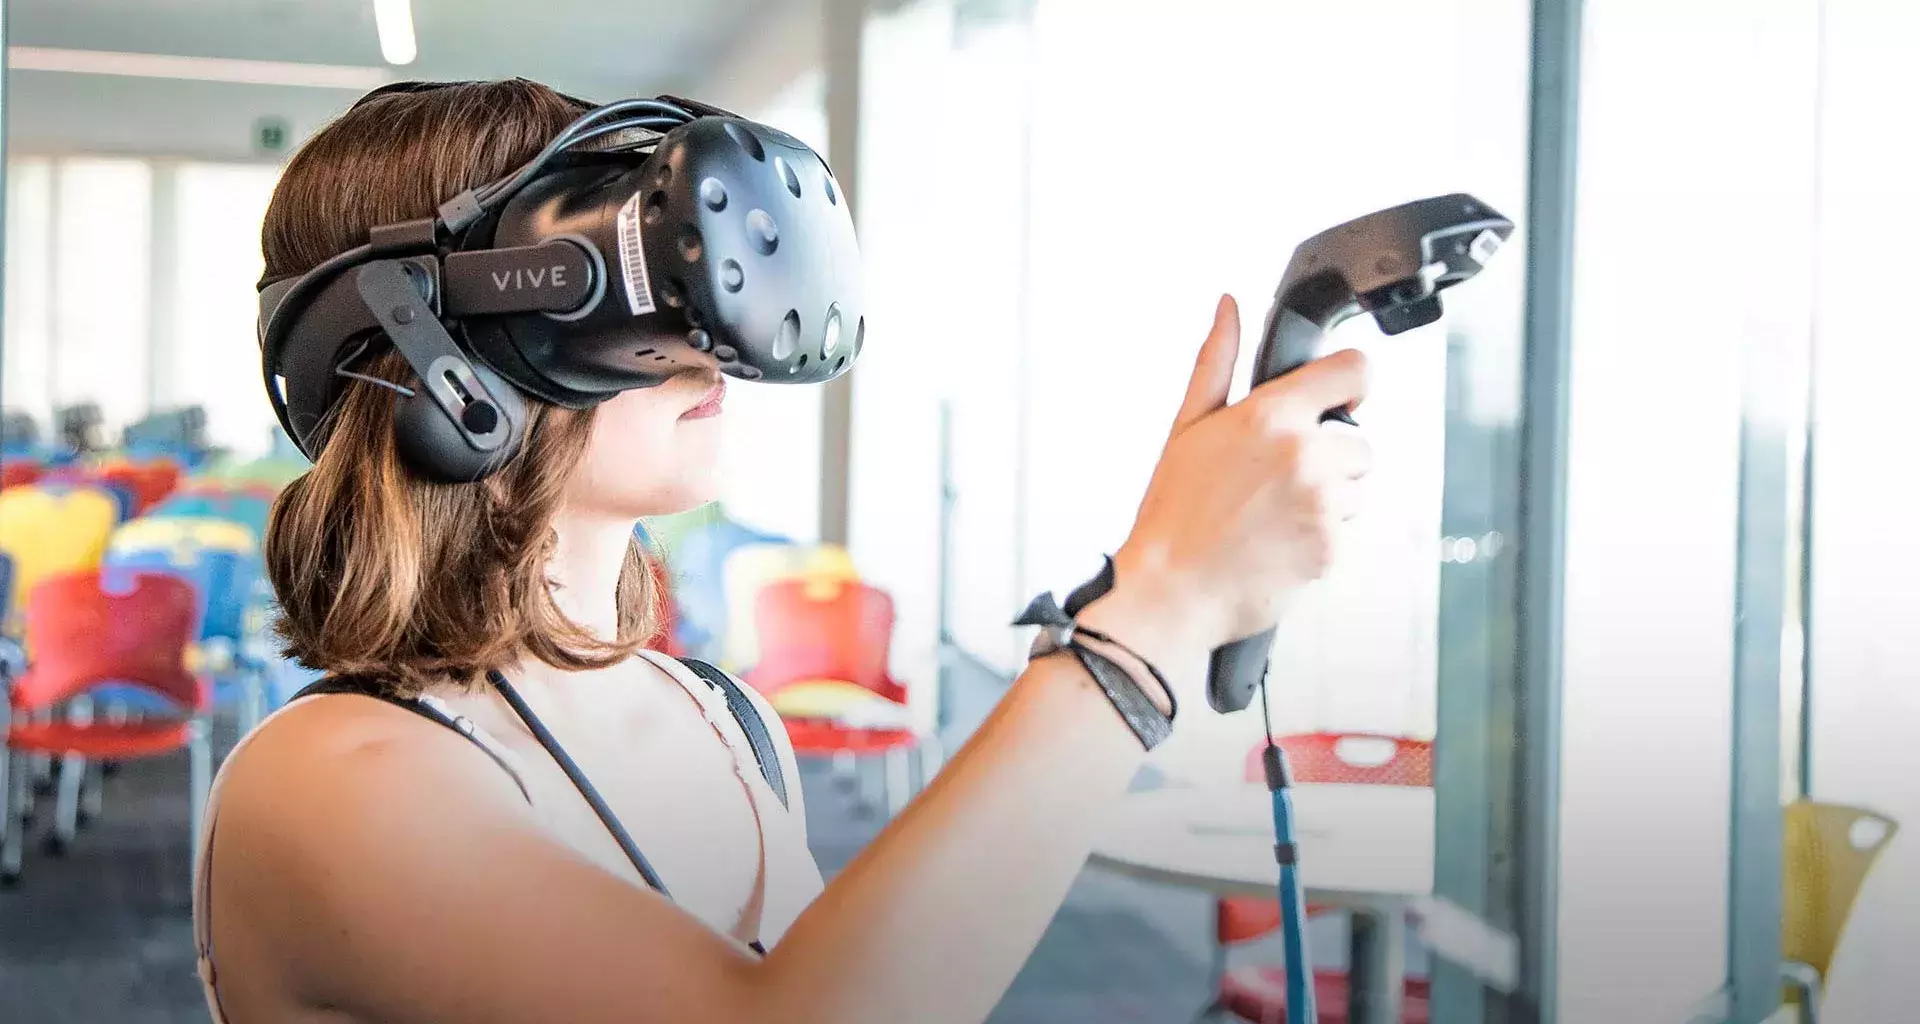 A journey into... virtual reality! Tec VR Zones open on 7 campuses